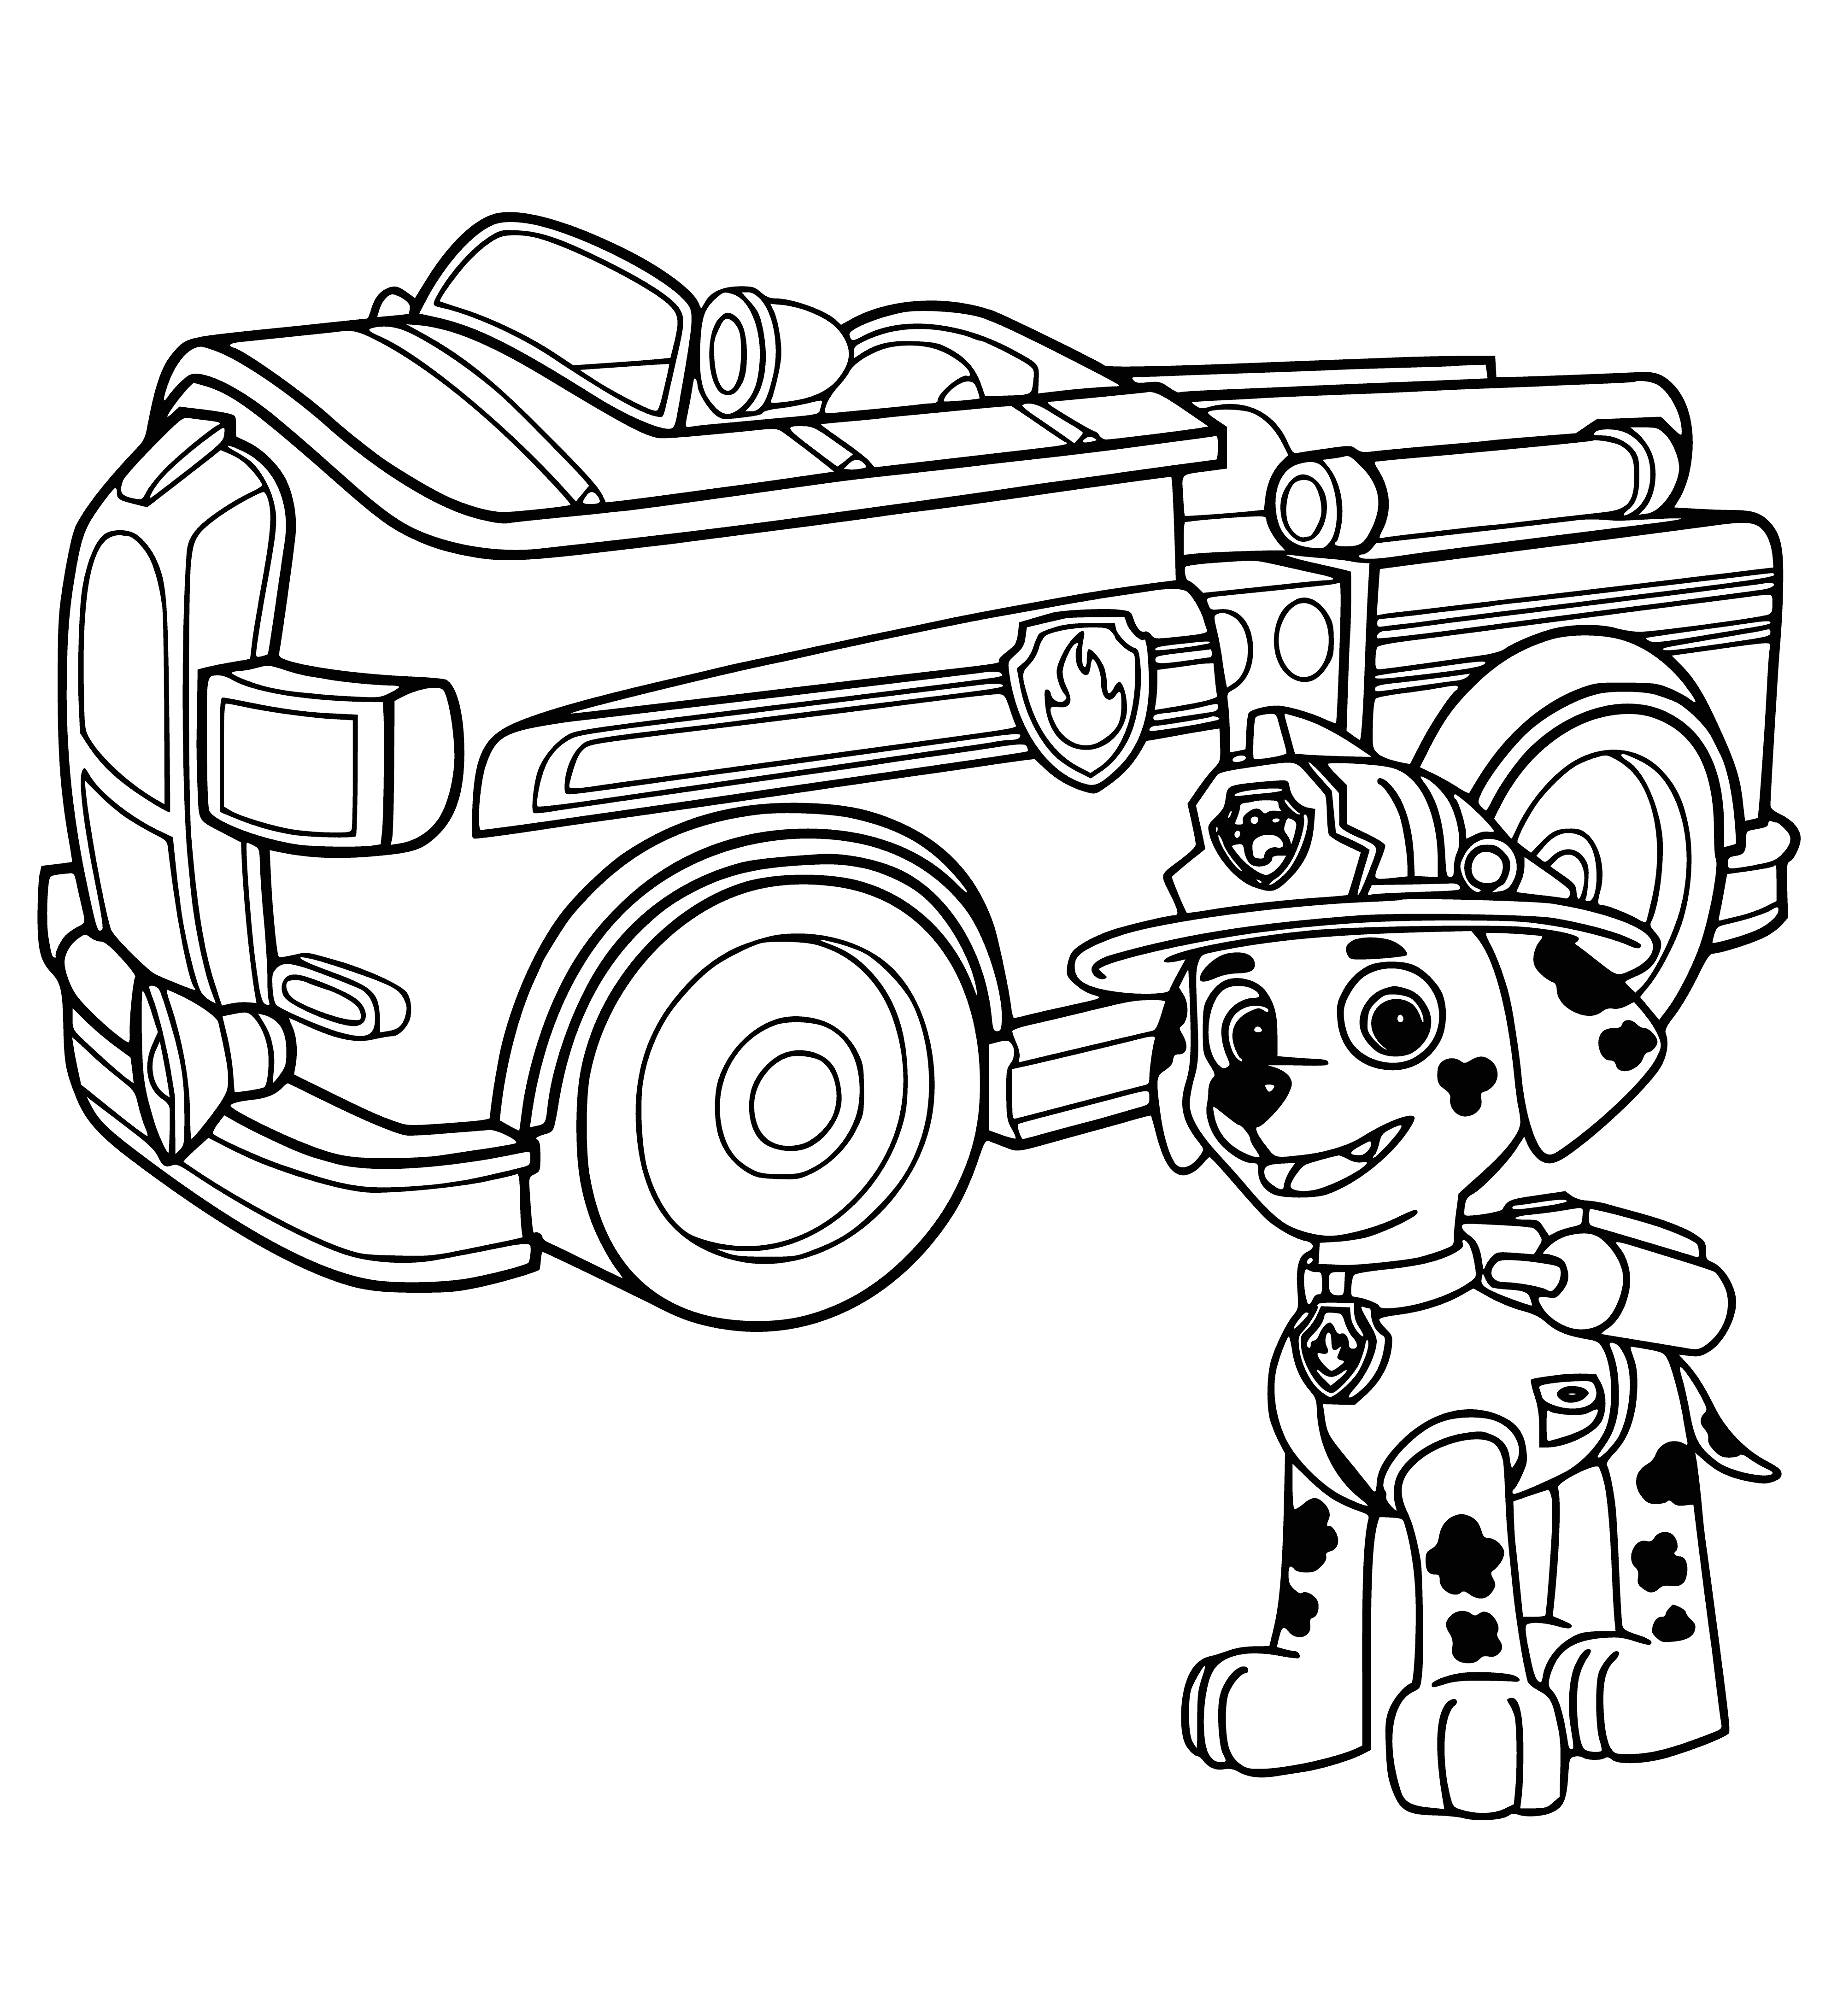 Marshal and fire truck coloring page